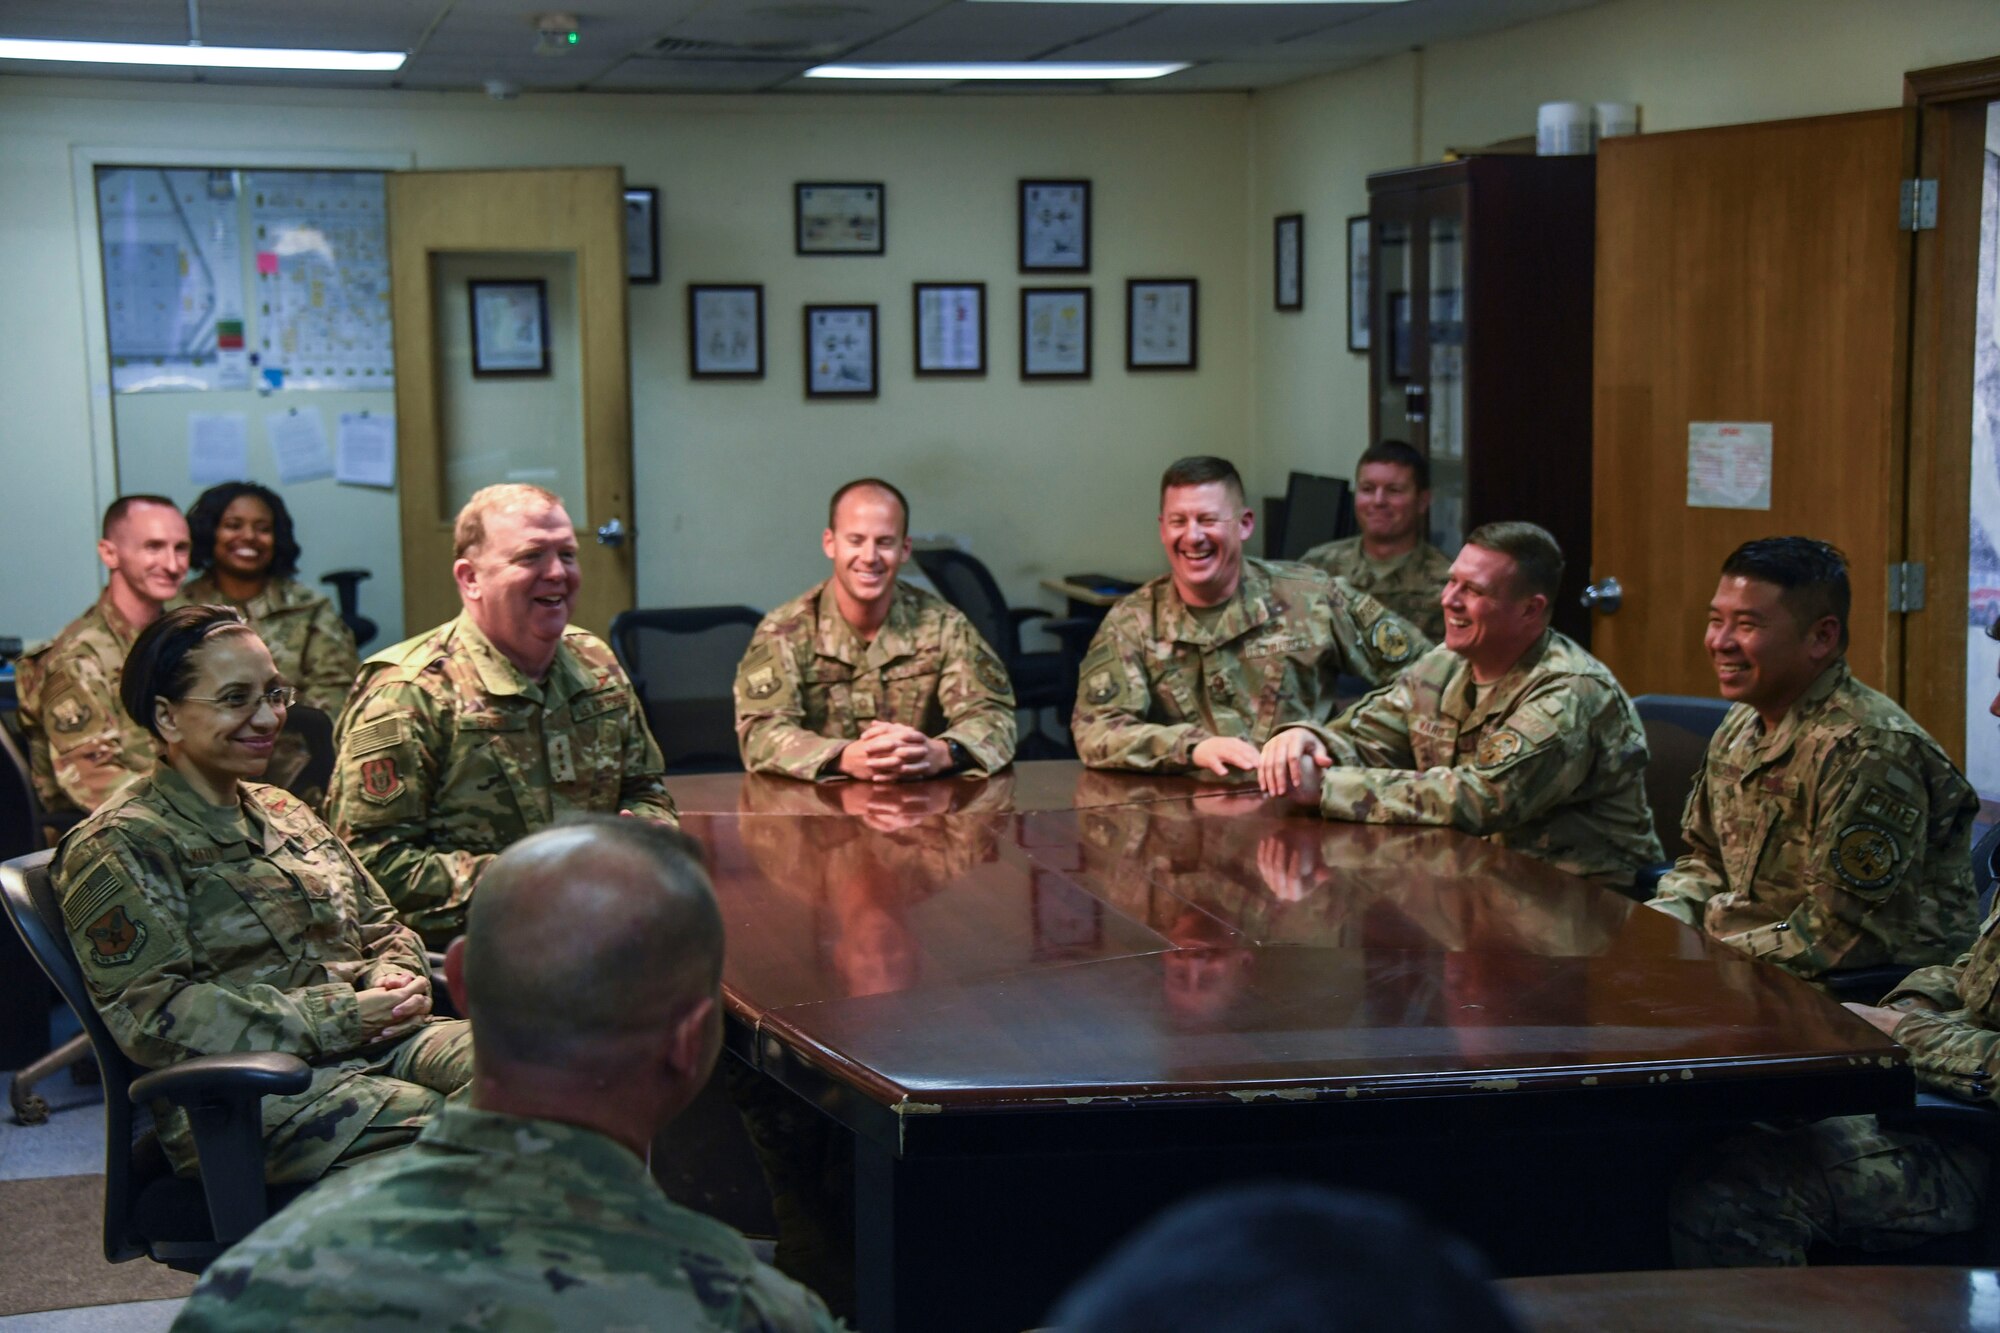 U.S. Air Force Lt. Gen. Richard Scobee, commander of Air Force Reserve Command, speaks to 380th Expeditionary Civil Engineer Squadron Fire Fighters during his visit to Al Dhafra Air Base, United Arab Emirates, Feb. 13, 2019.